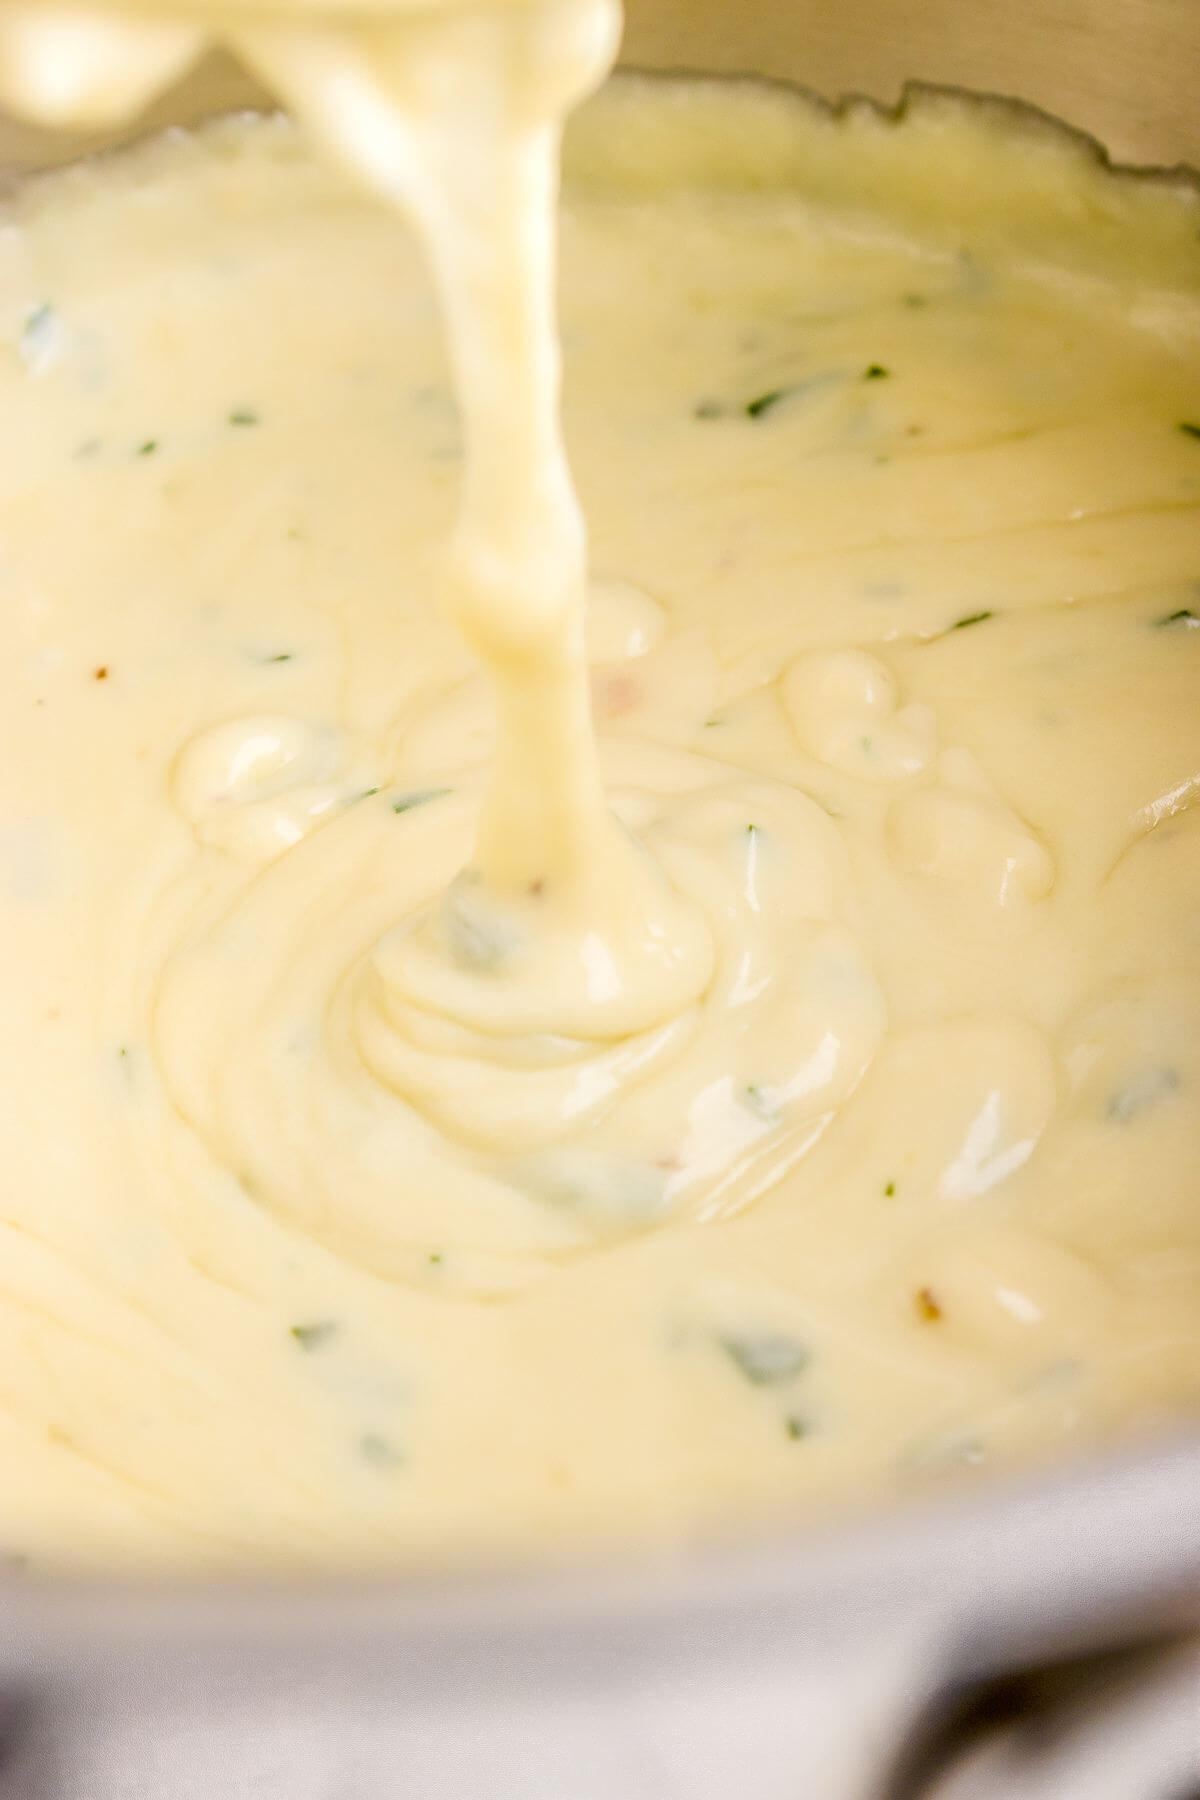 White sauce drips down into the whole pan of sauce.